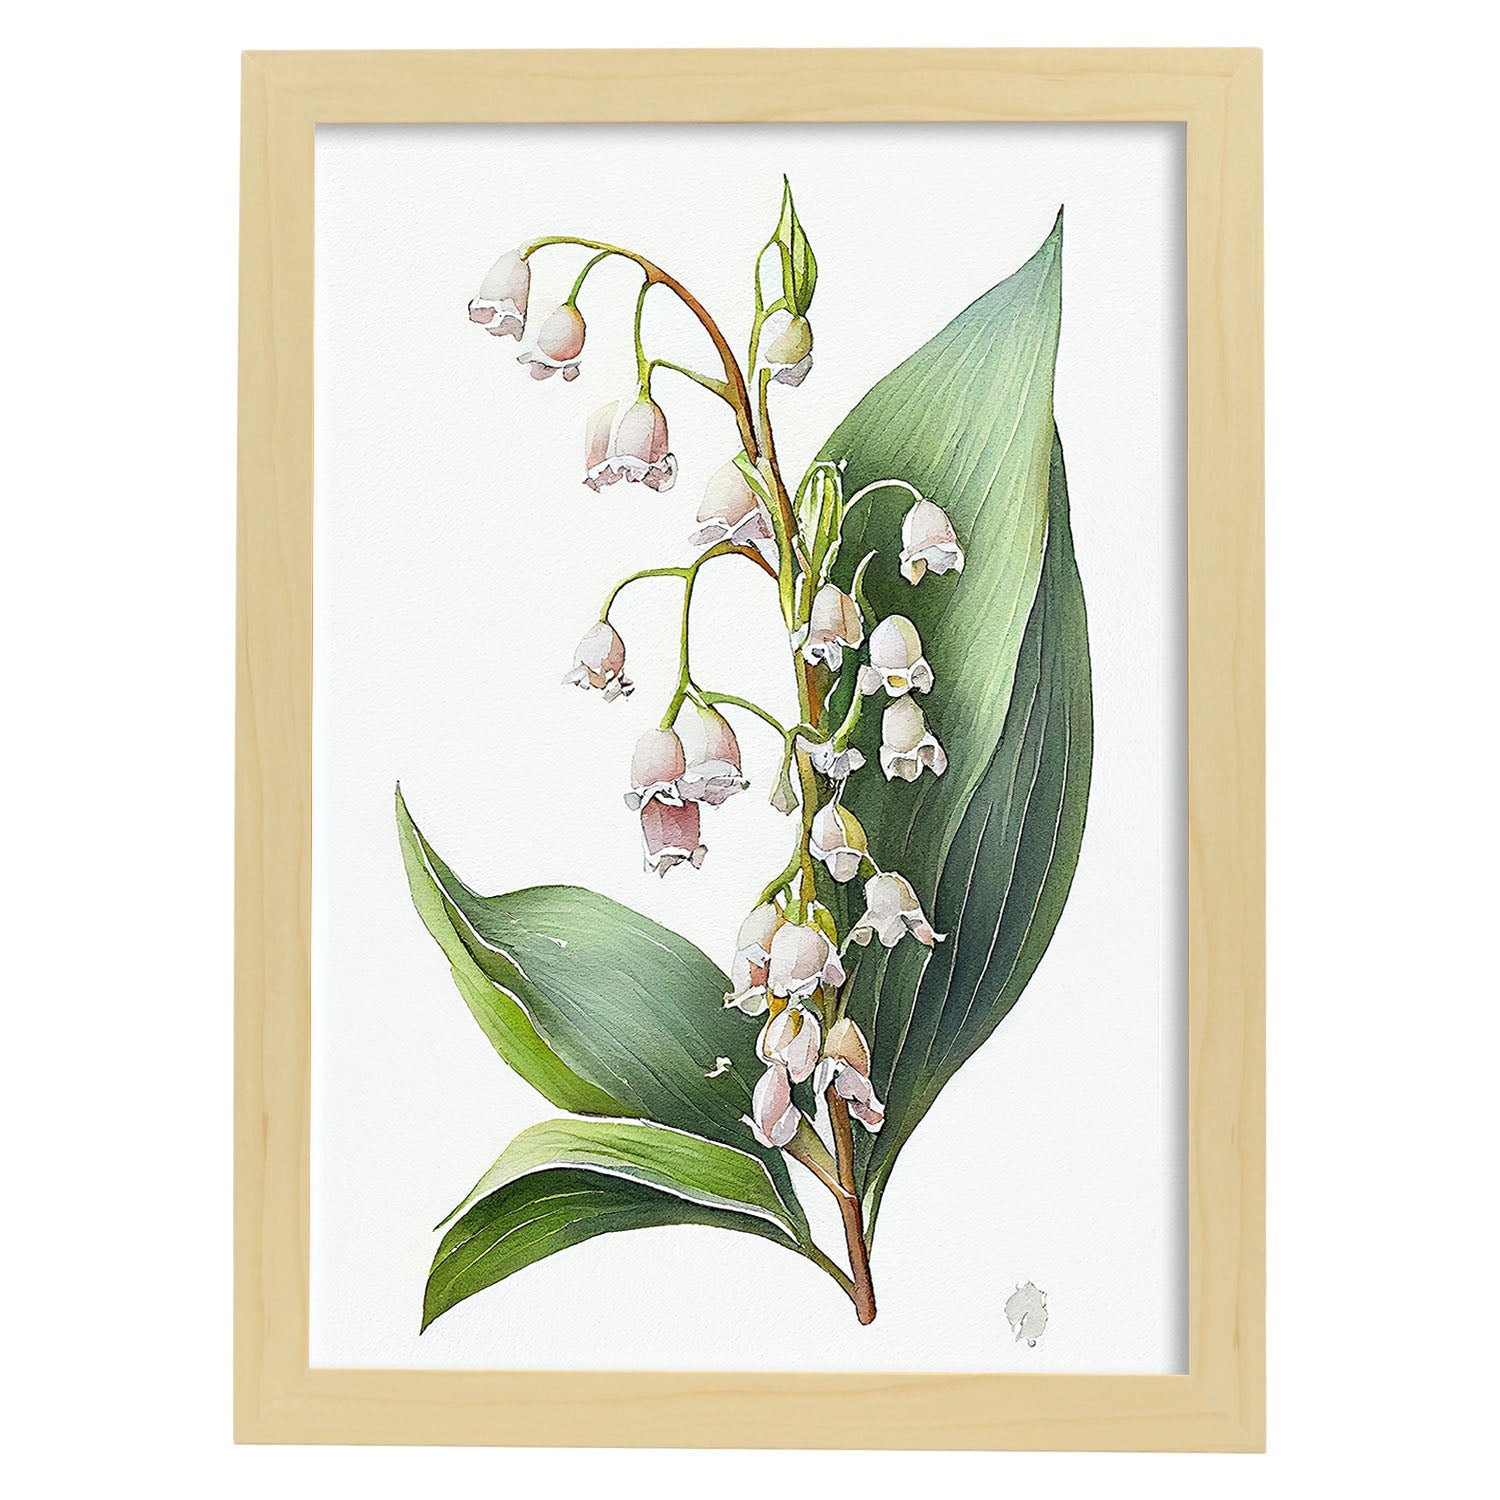 Nacnic watercolor minmal Lily of the Valley. Aesthetic Wall Art Prints for Bedroom or Living Room Design.-Artwork-Nacnic-A4-Marco Madera Clara-Nacnic Estudio SL